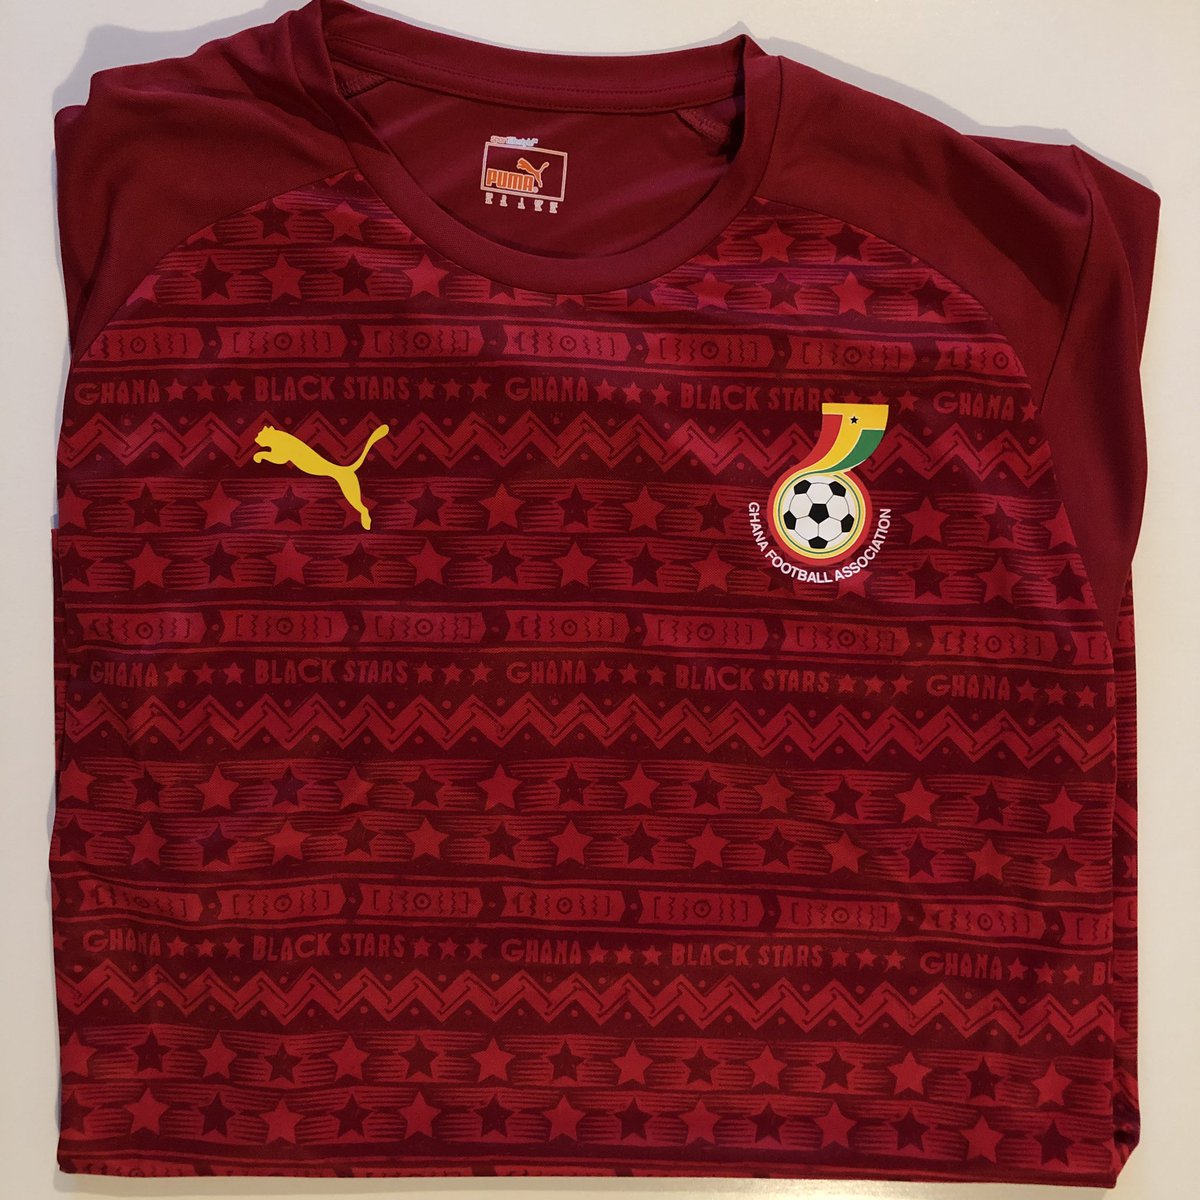  @ghanafaofficial Away jersey, 2014 @PUMA, officially licensedIn honour of @afcon2019 being the last tournament of the season still to be assigned: here’s my  #Ghana away shirt, sourced from  @classicshirts; i love the pattern and the detail in the sleeves